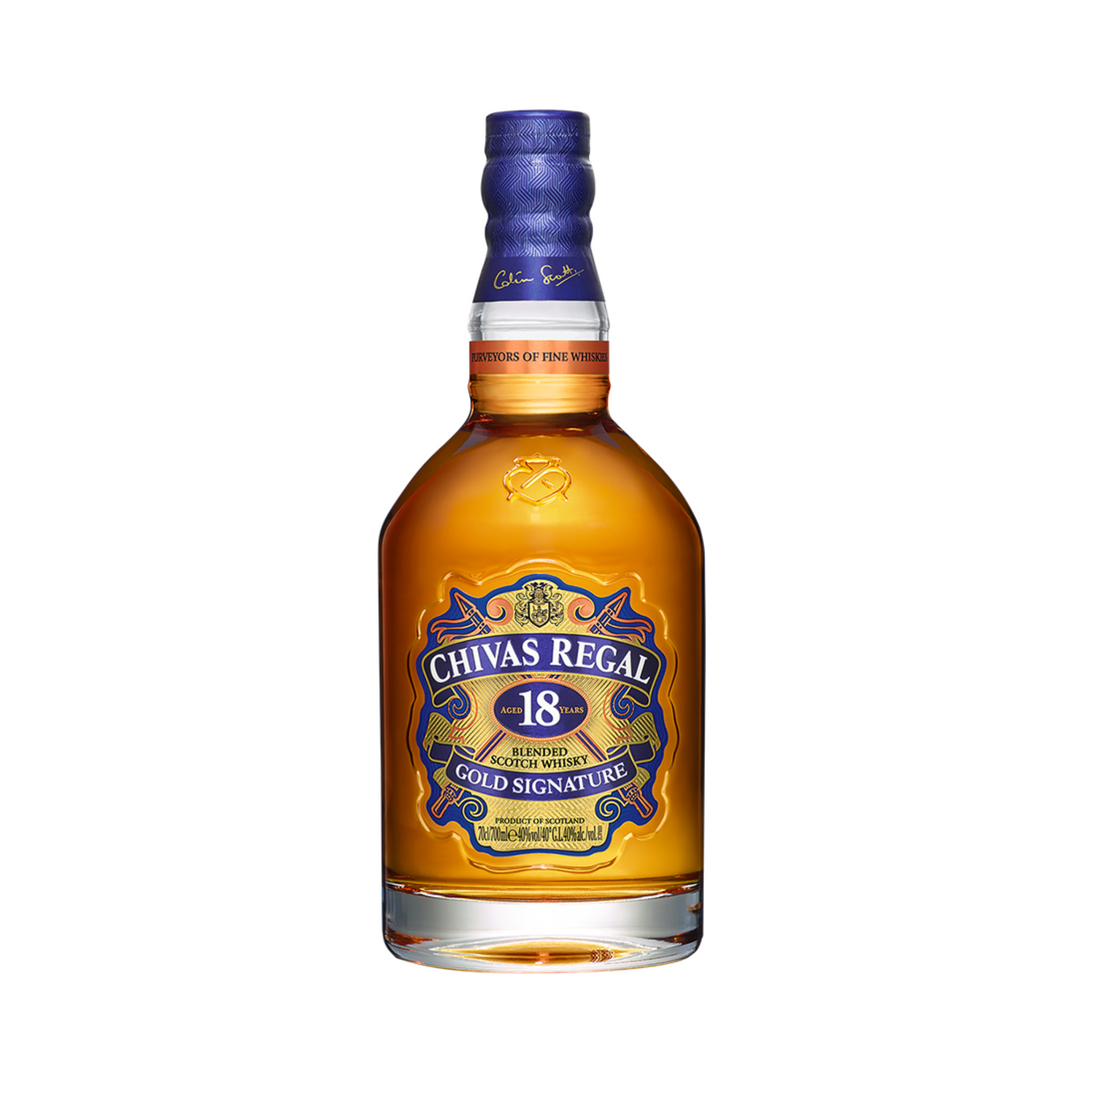 Chivas Regal 18 Years Old Blended Scotch Whisky, 700mL